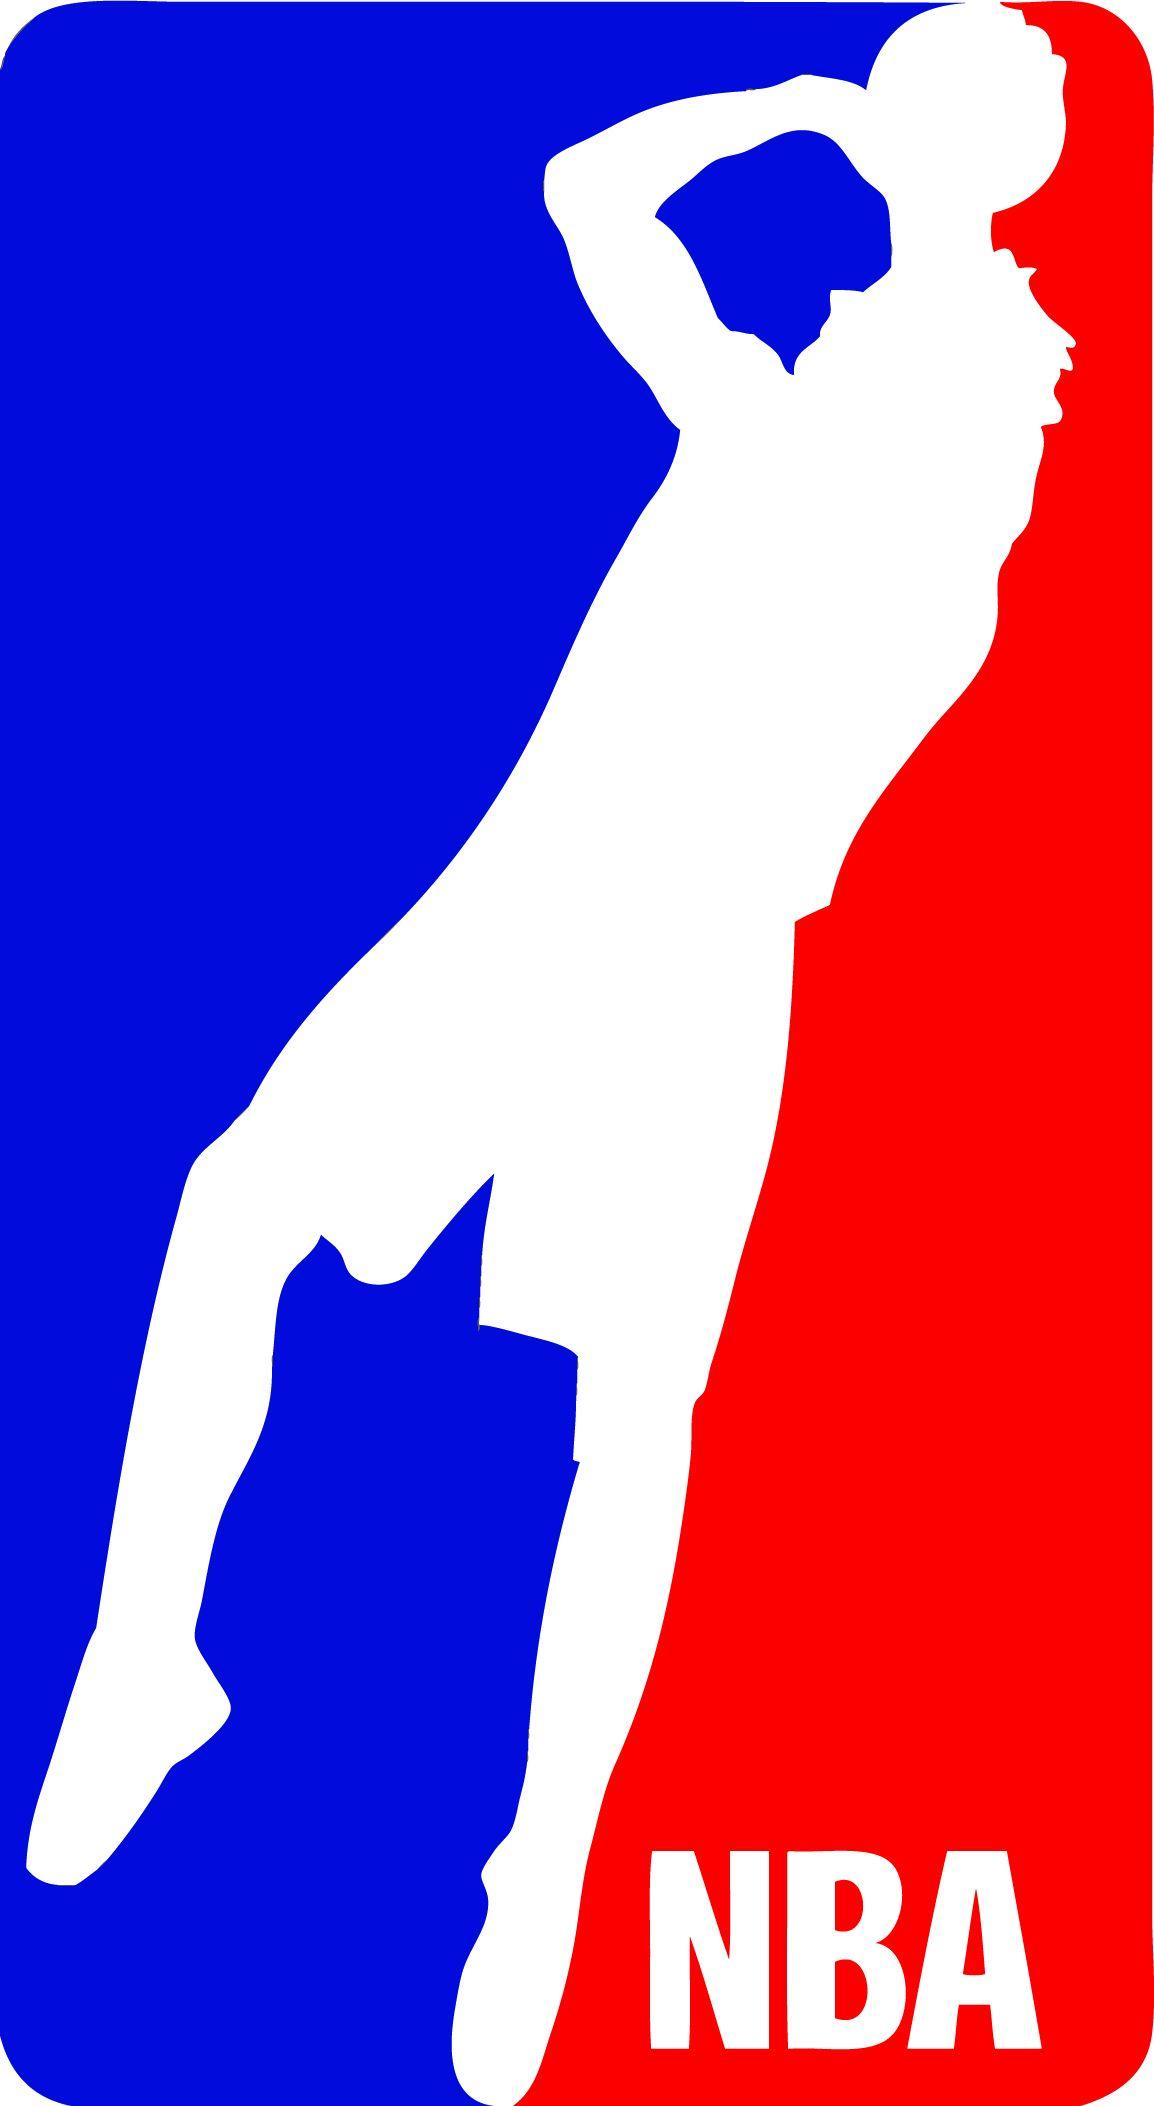 NBA Kobe Logo - Since Dirk Nowitzki has passed Jerry West on the all time scoring ...